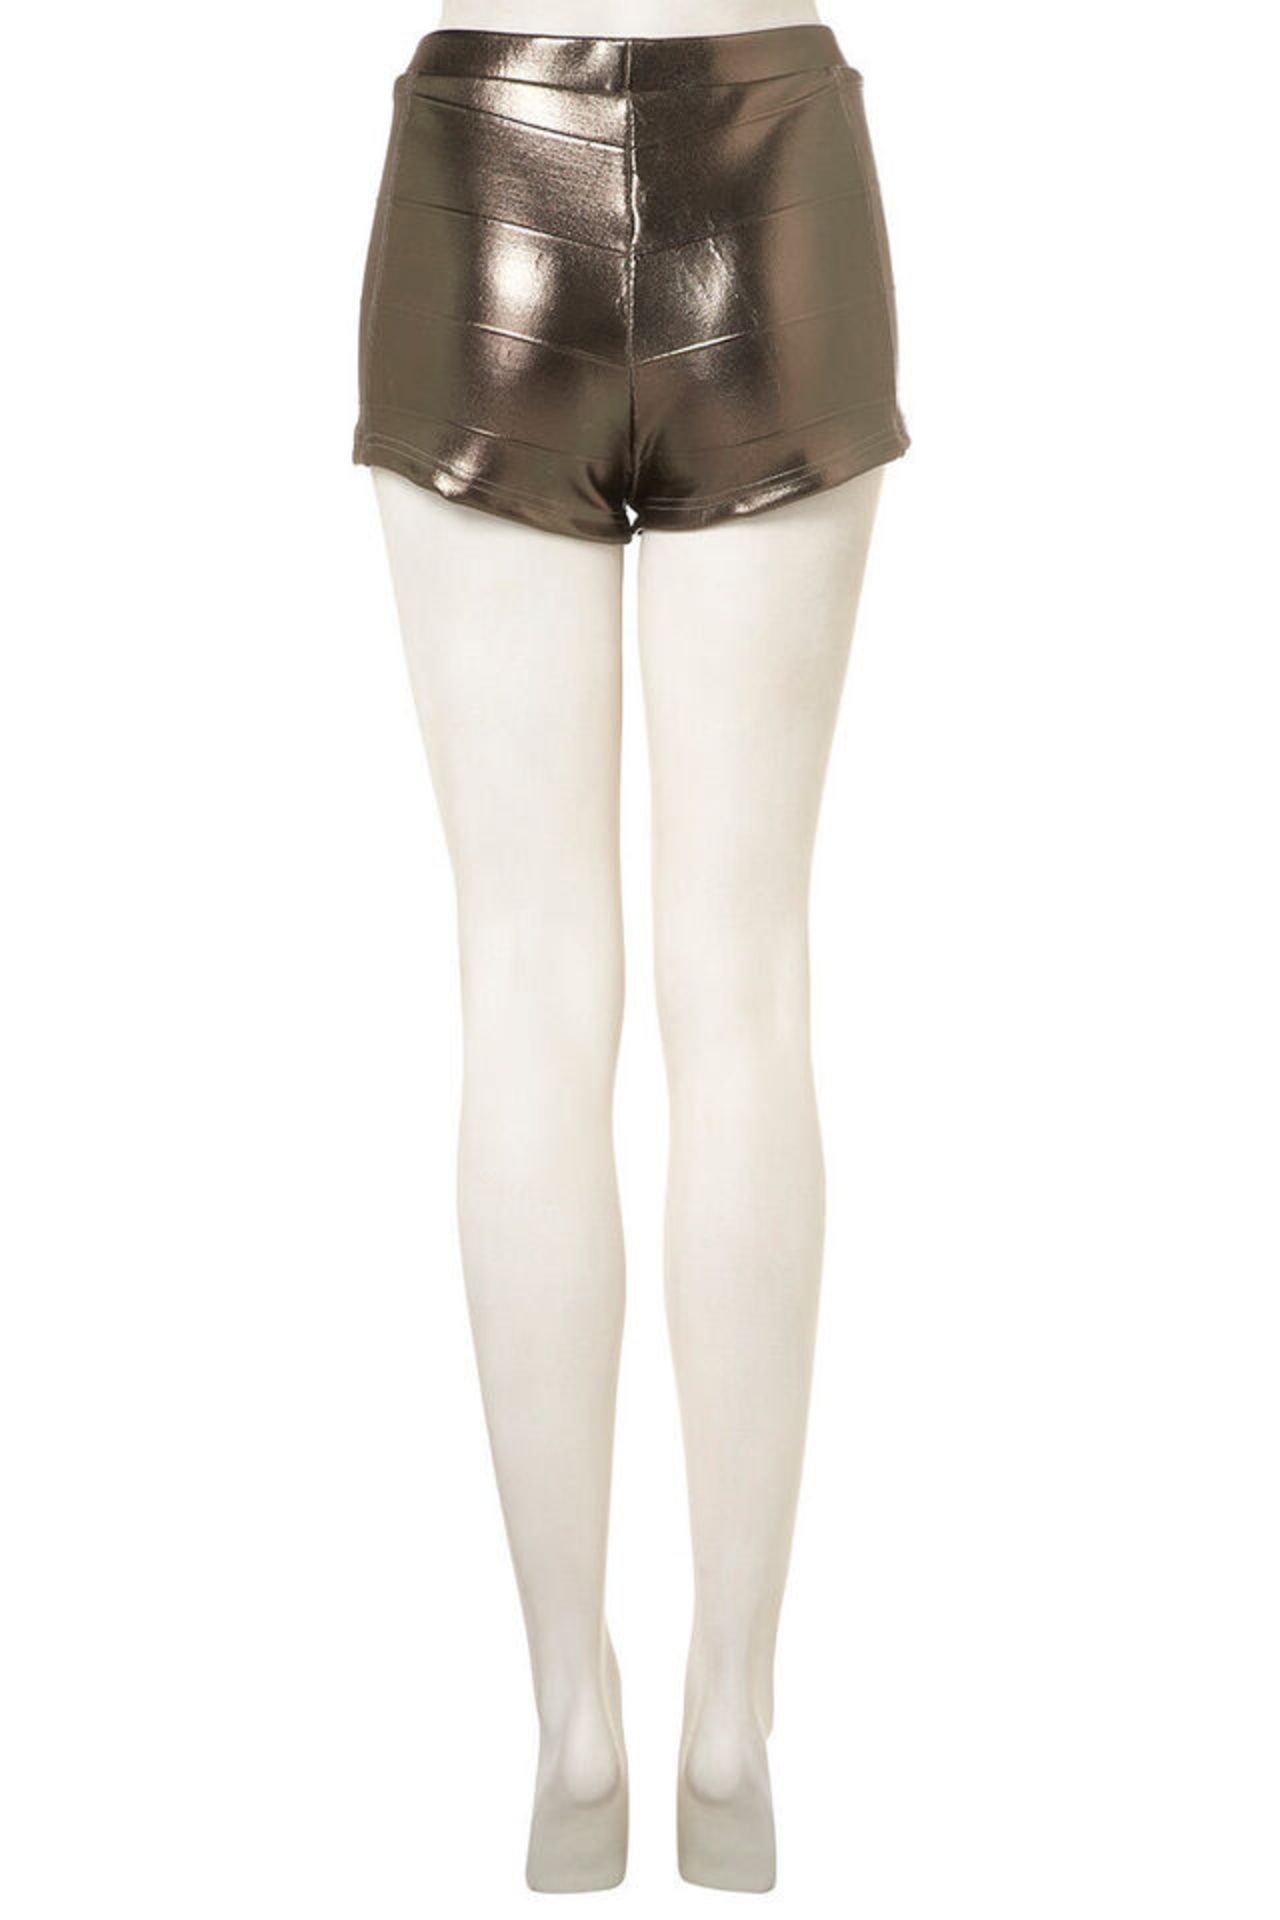 New Tags In Bags Topshop Ladies Khaki Foil Knickers Hot Pants Shorts x 36 RRP £726 - Image 2 of 3